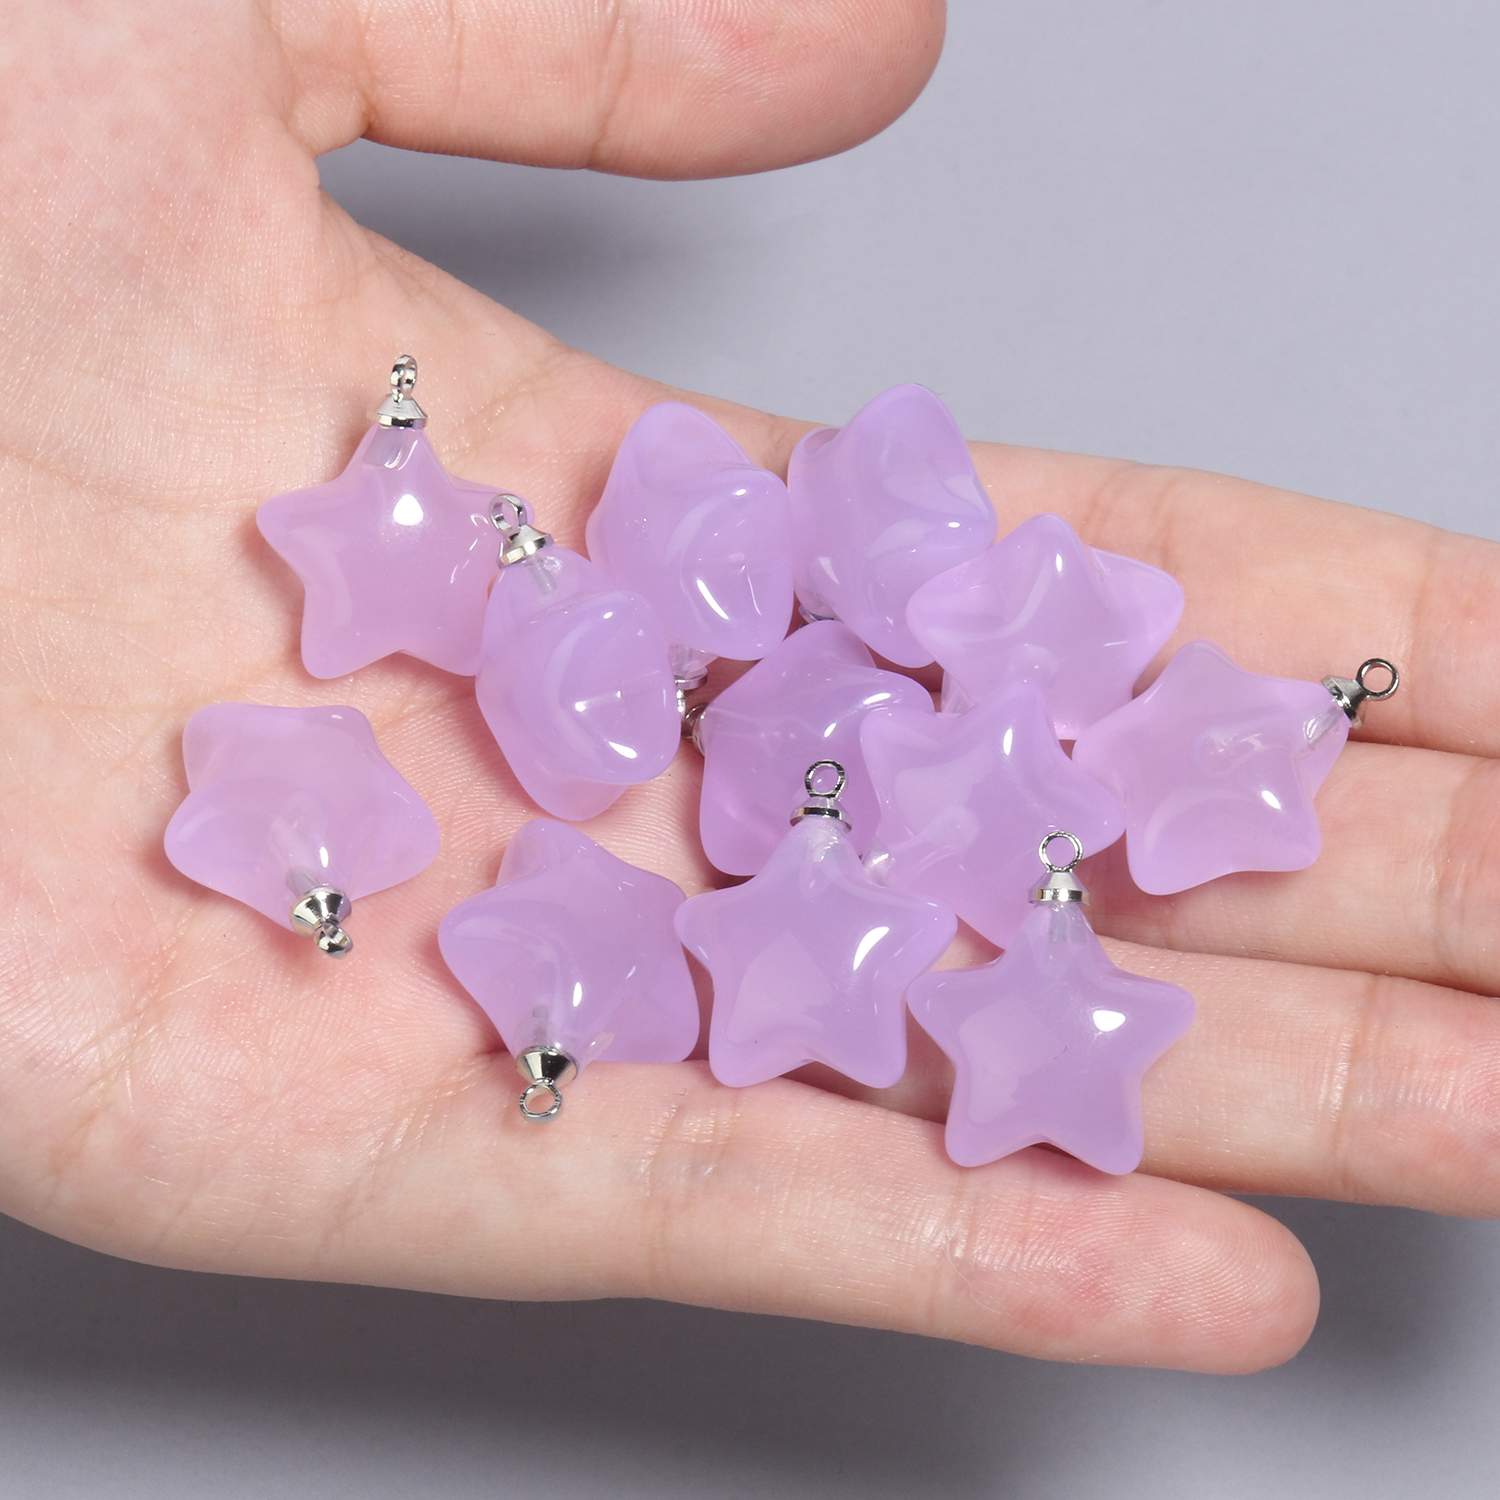 Mixed Cute Resin Star Charms Pendants Earrings Jewelry Making Keychain  10pcs Set